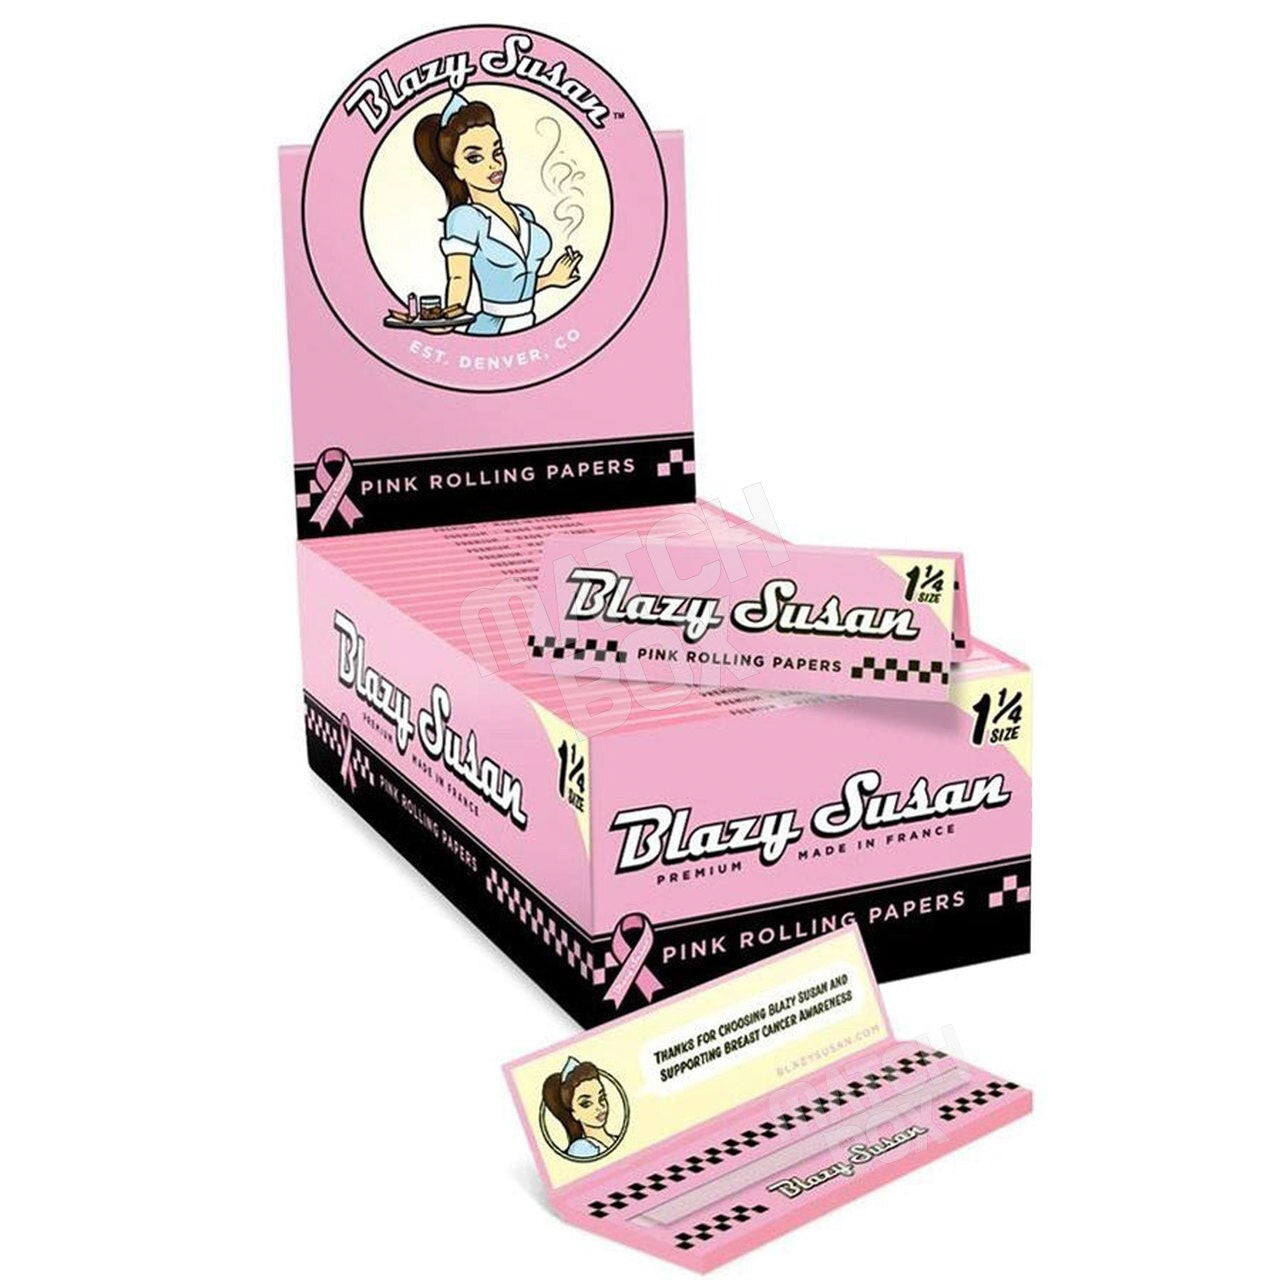 Blazy Susan 1 1/4 Size Pink Rolling Paper Full Box